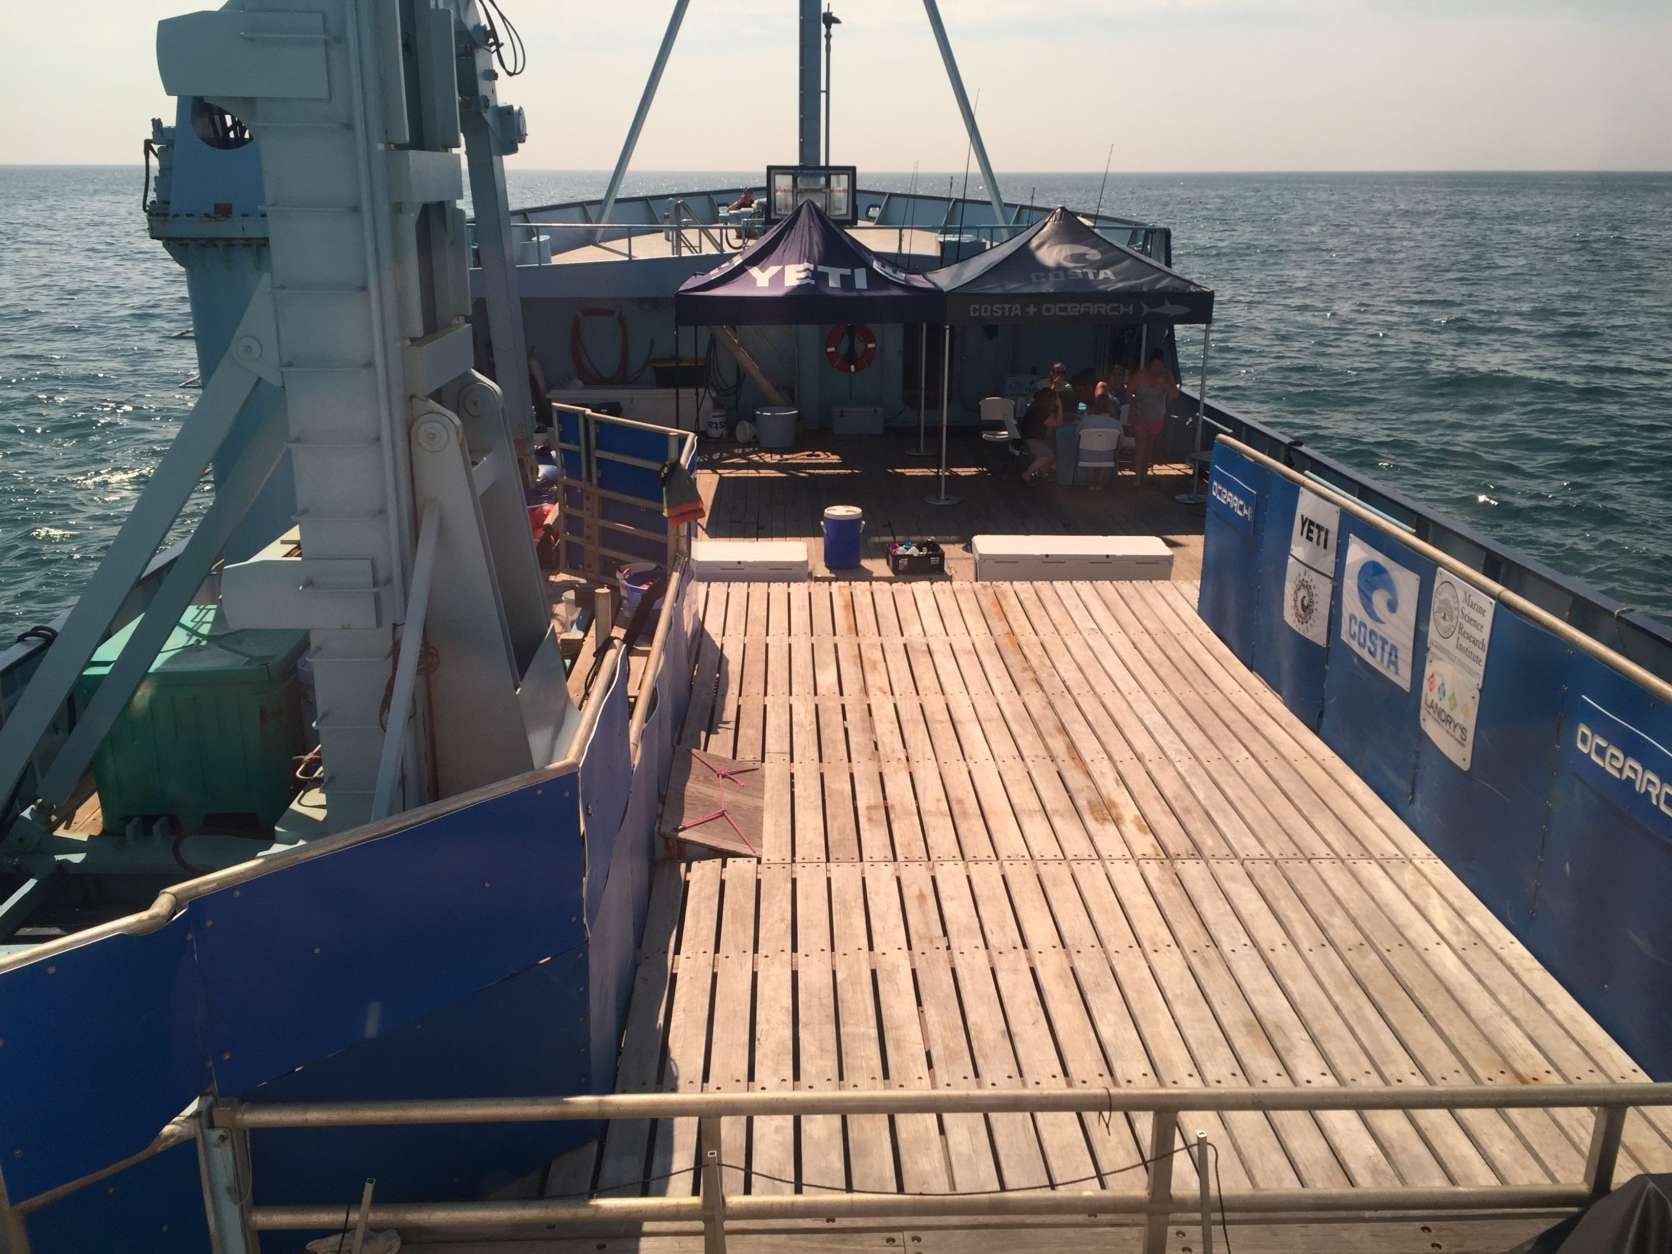 If this kind of boat looks familiar, it's because the OCEARCH is actually a decommissioned crab boat. (WTOP/Michelle Basch)